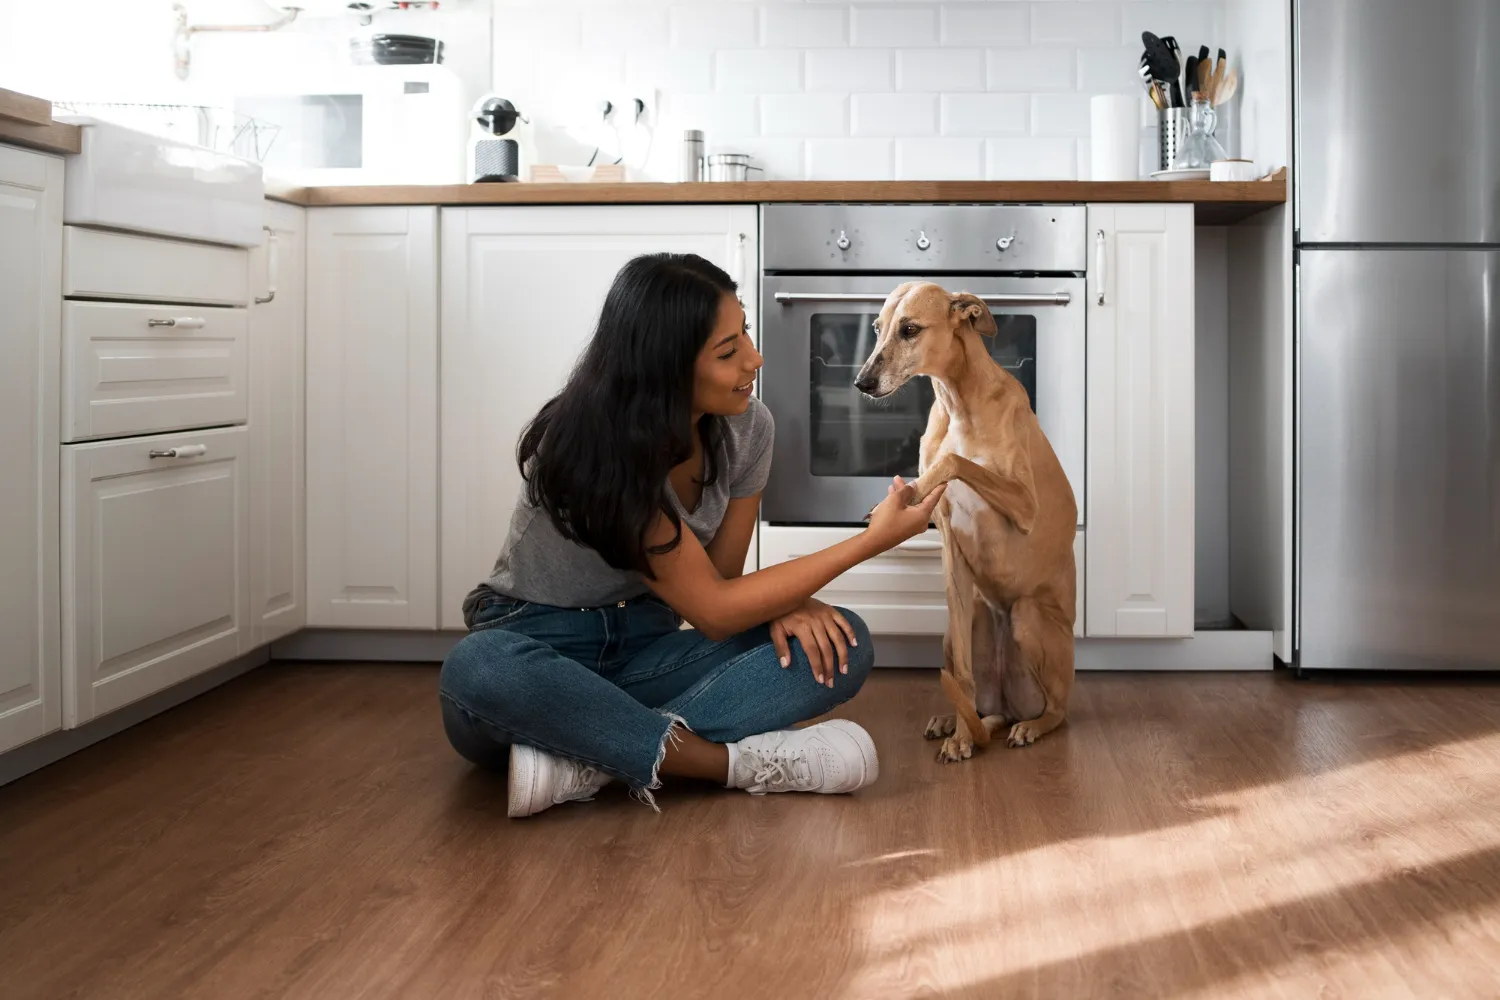 When looking for flooring that is safe for pets, laminate is a common option. Laminate flooring is durable, long-lasting, and easy to maintain. It also hides scratches and wear and tear from active pets.